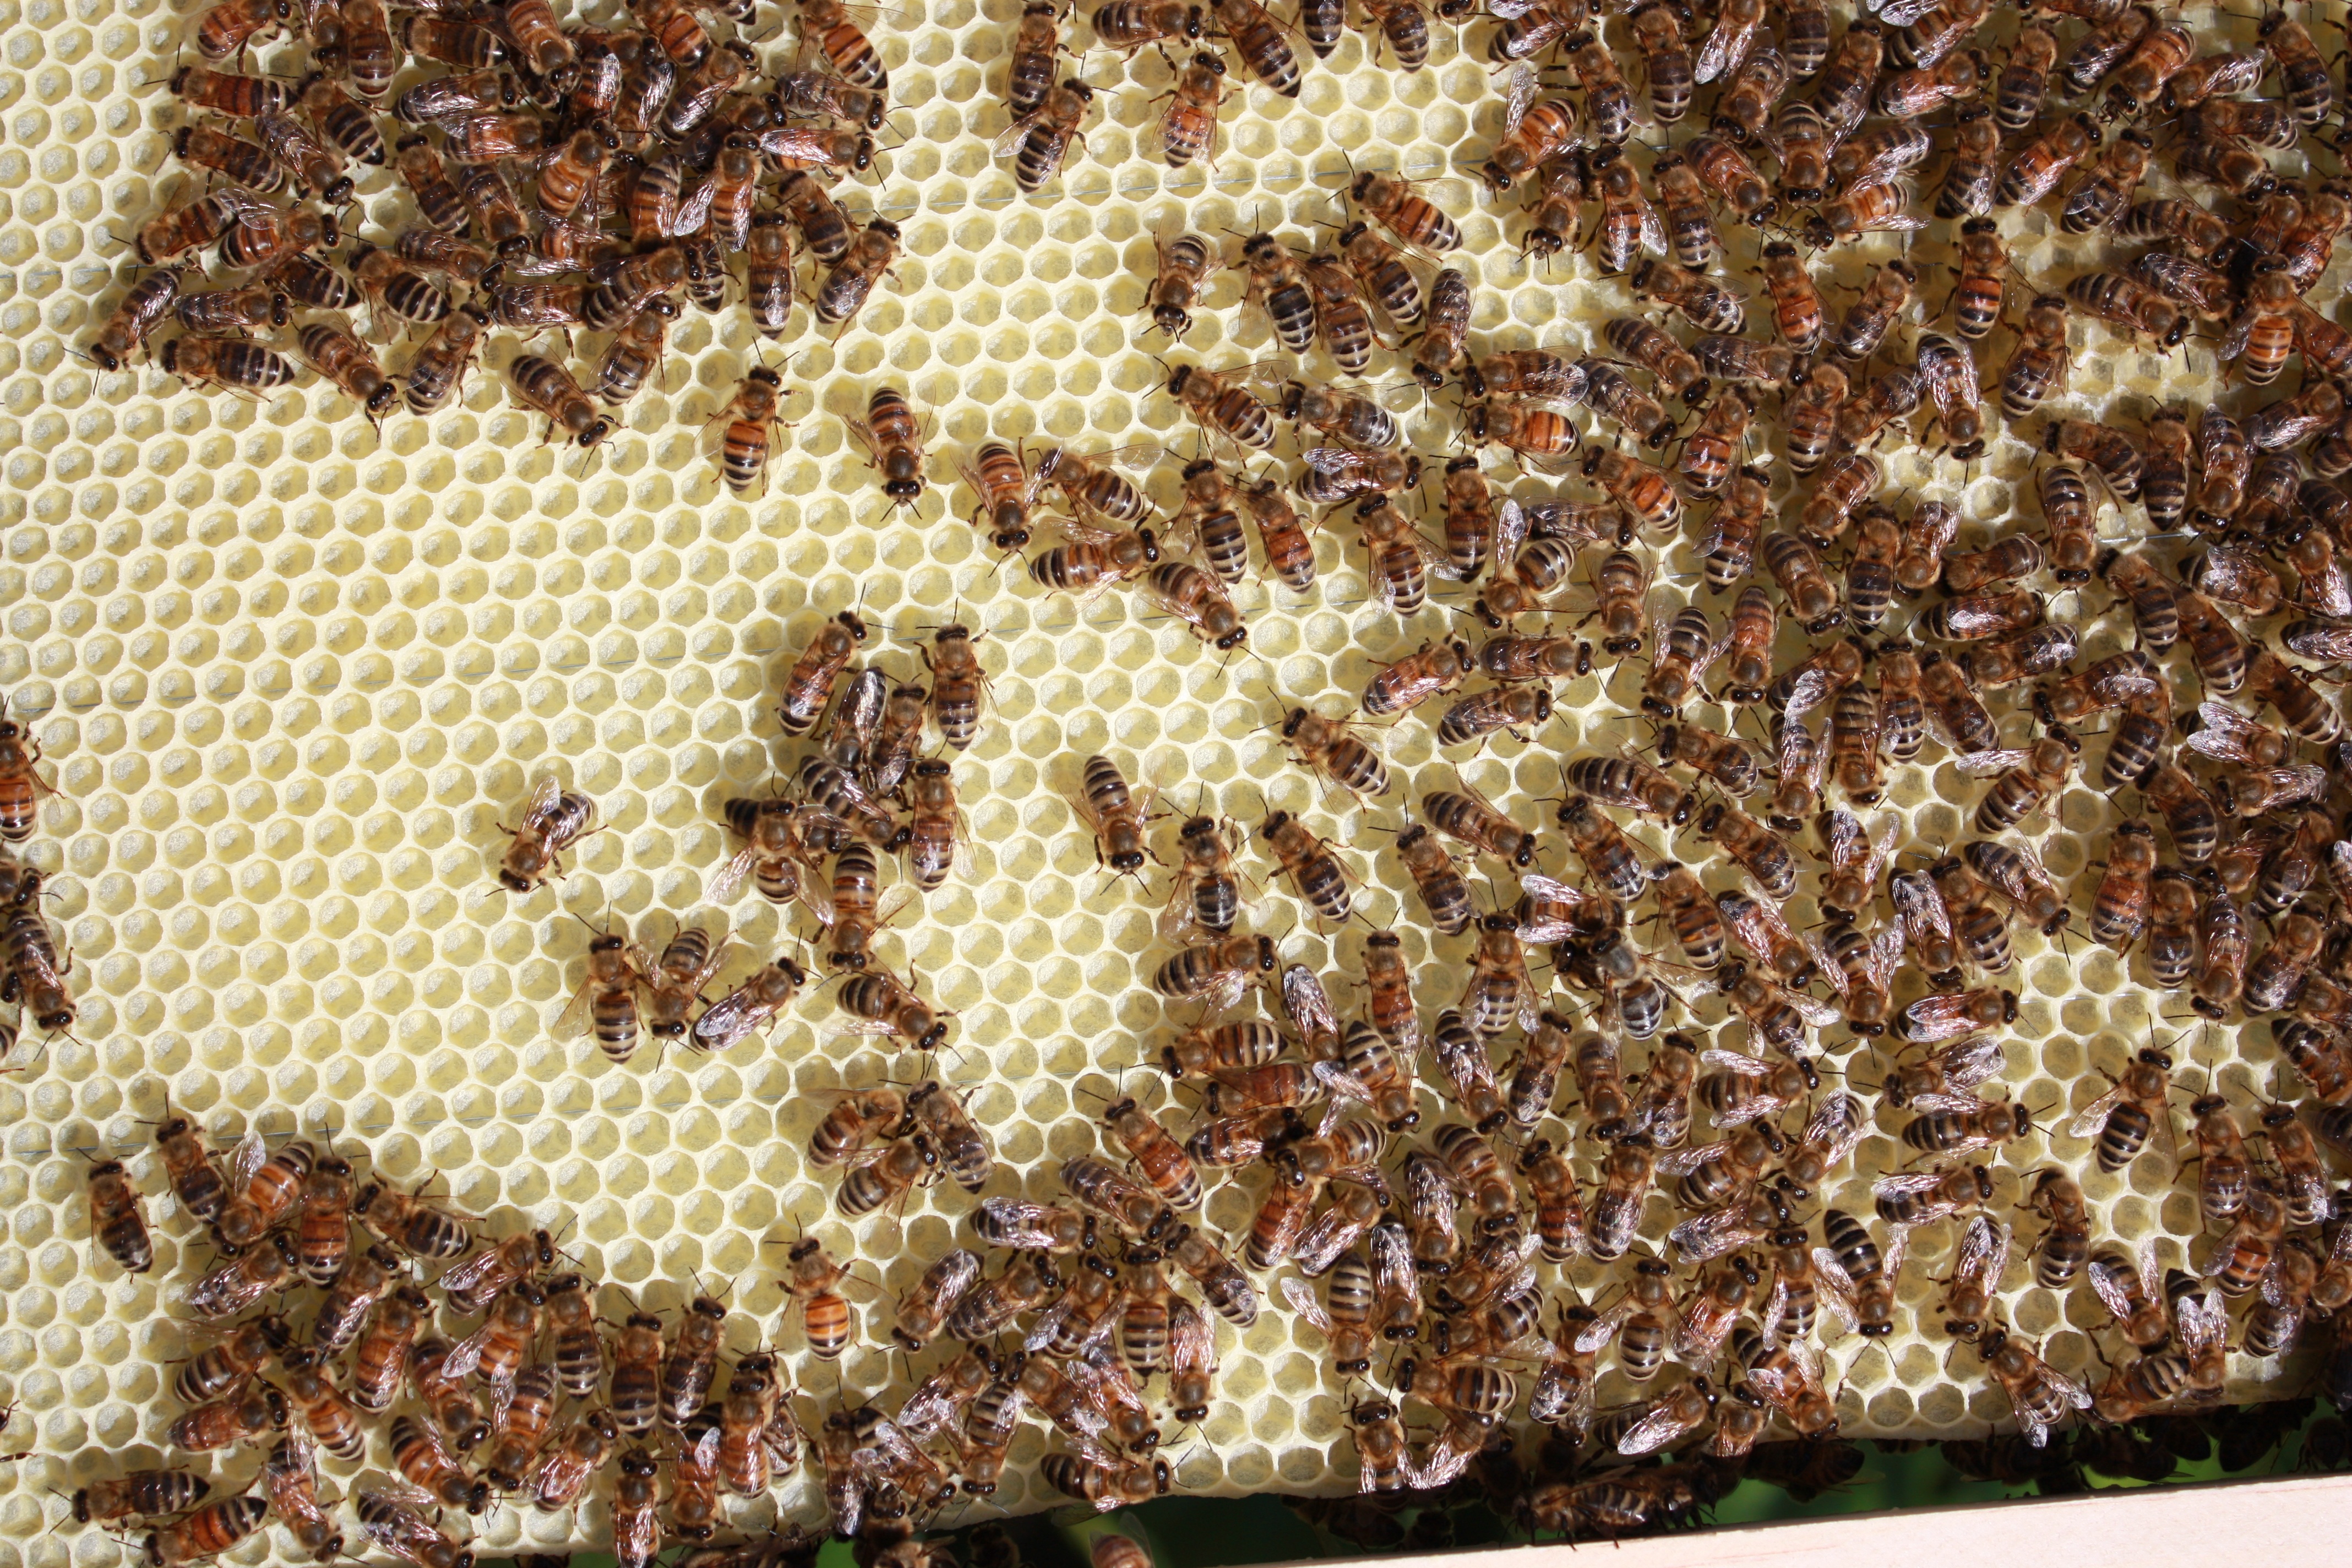 image of several hundreds of bees